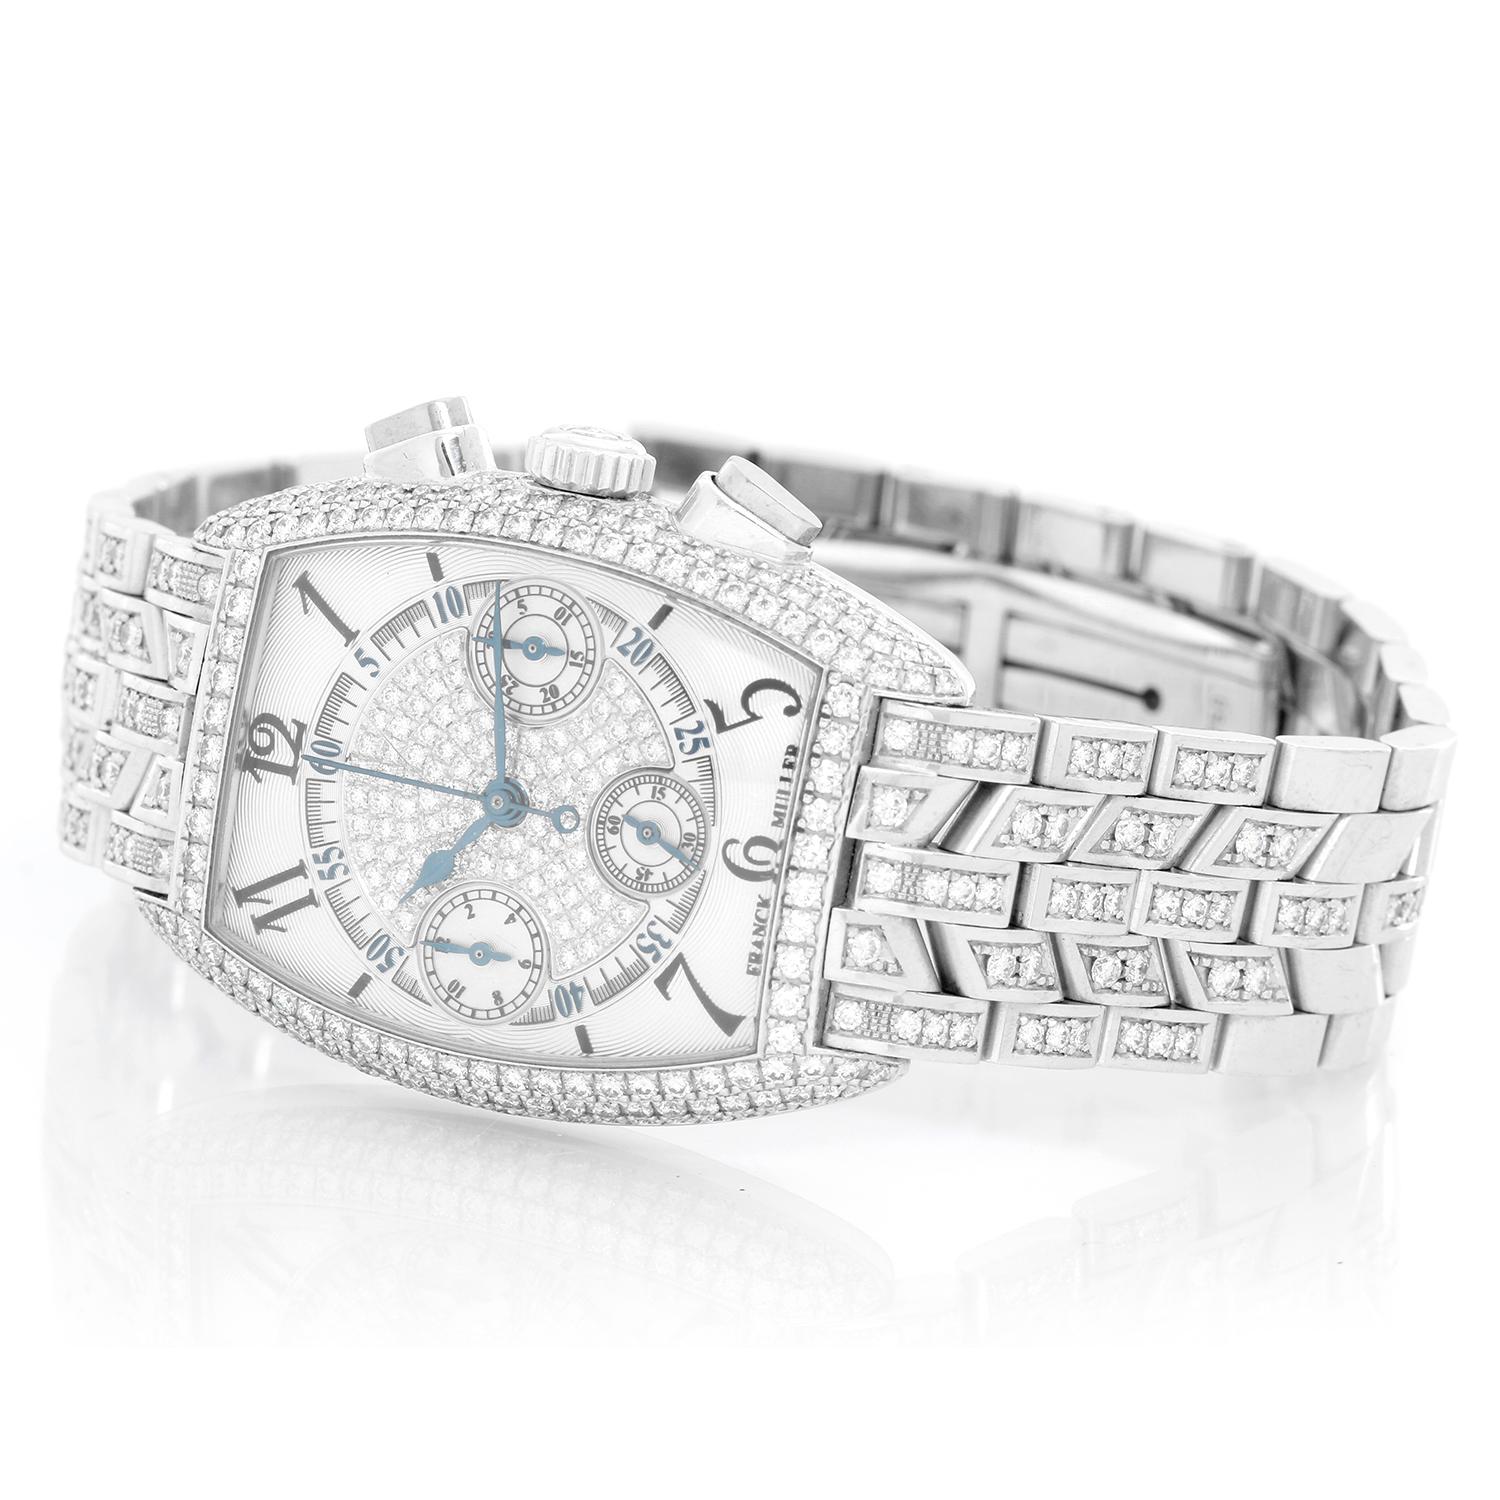 Franck Muller Cintree Curvex Chronograph Pave Diamond Ladies Watch - Manual winding; chronograph. 18k white gold polished and satin-finished case with diamond bezel; exposition back  (29mm x 39mm). Silver dial with pave diamond center; hour, minute